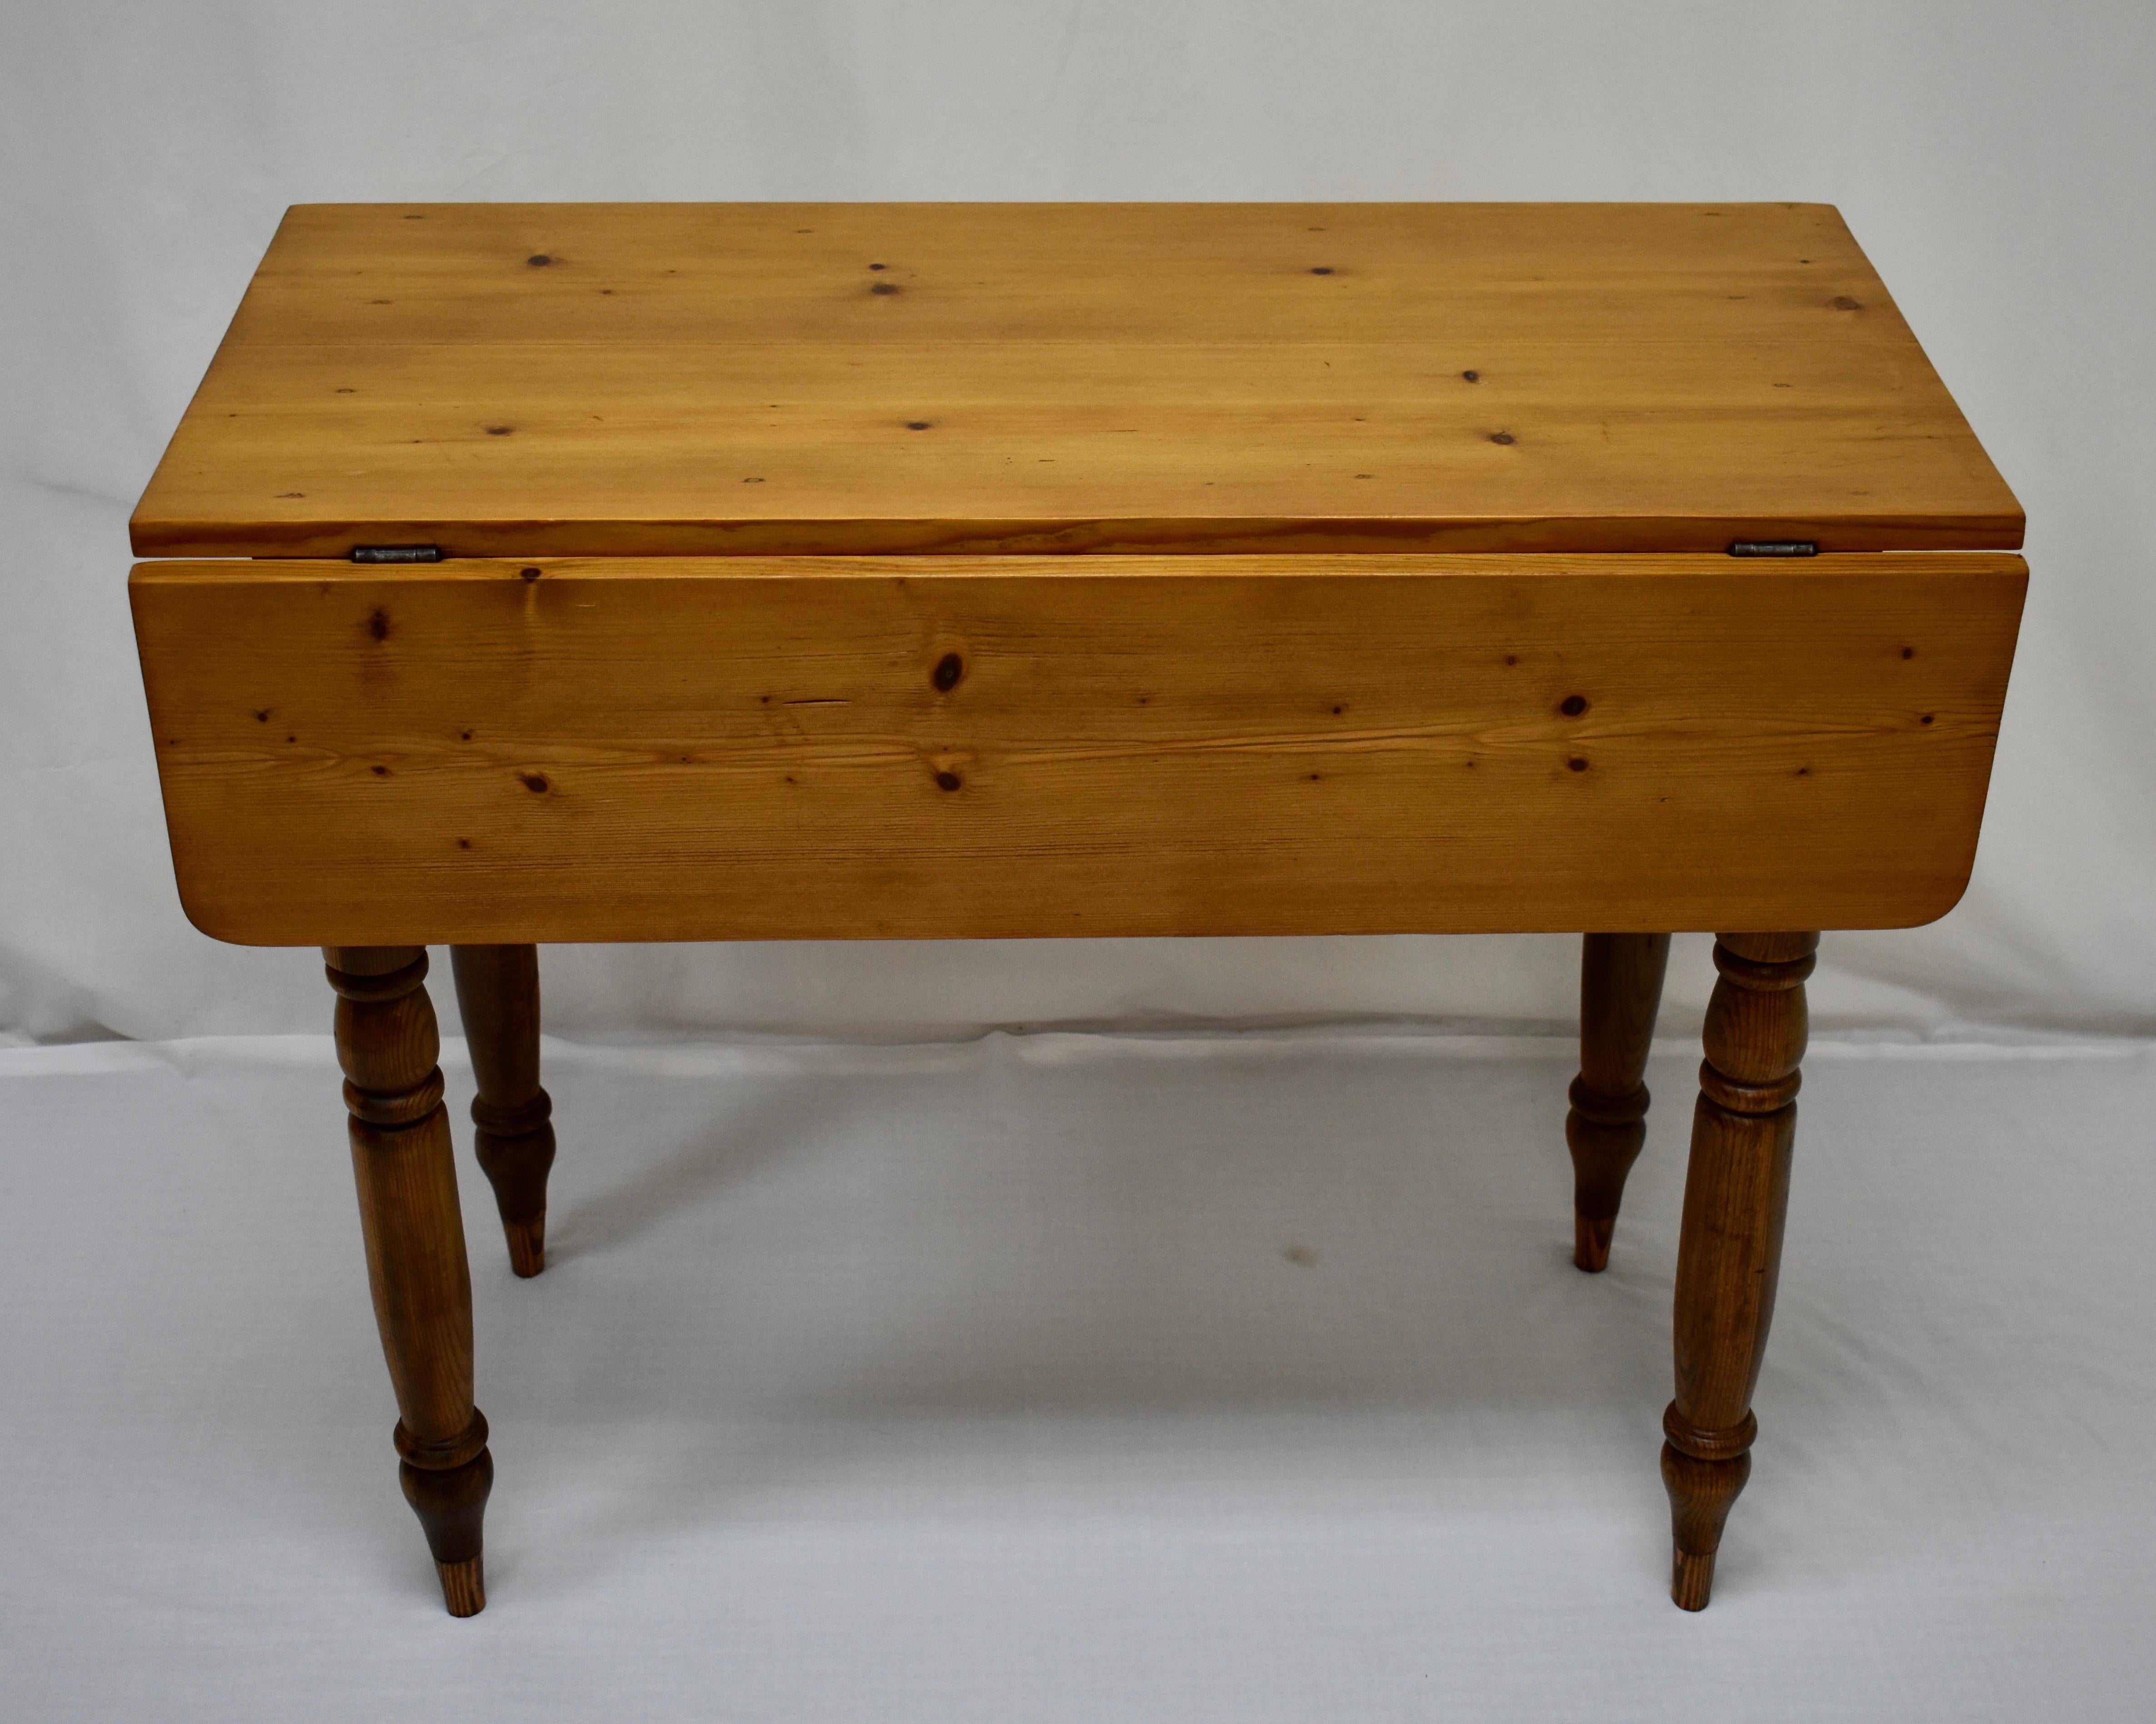 We don’t see many of these English pine drop-leaf tables so we were delighted to find this small version of a classic design. The beautiful two board top is only 18” deep, great for placement against a wall. With one leaf raised the surface is